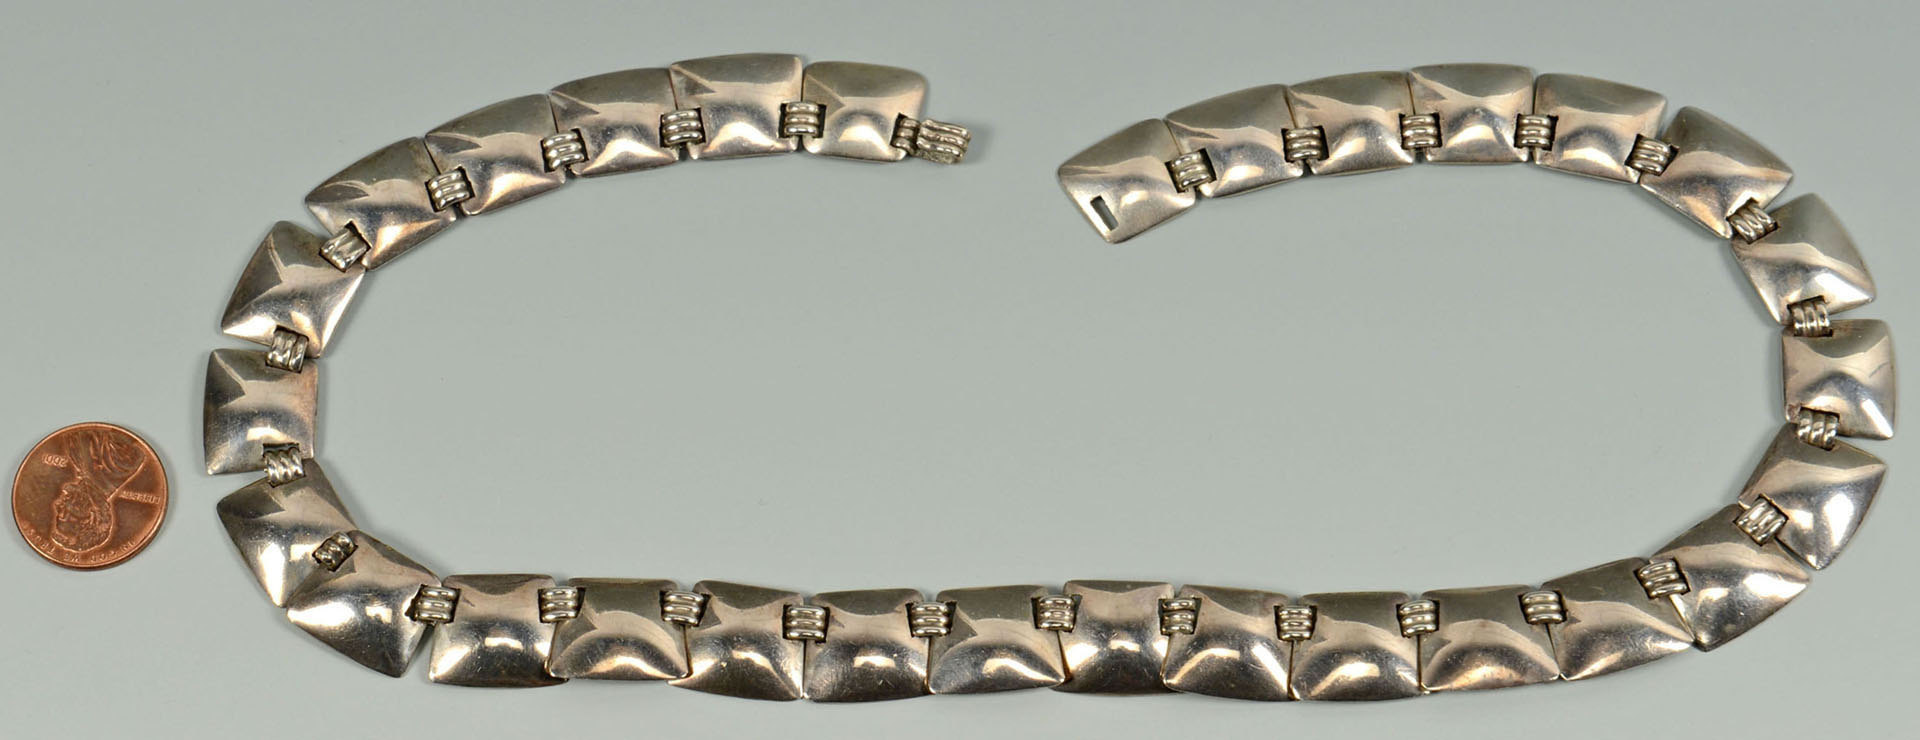 Lot 63: Fred Davis Silver Necklace